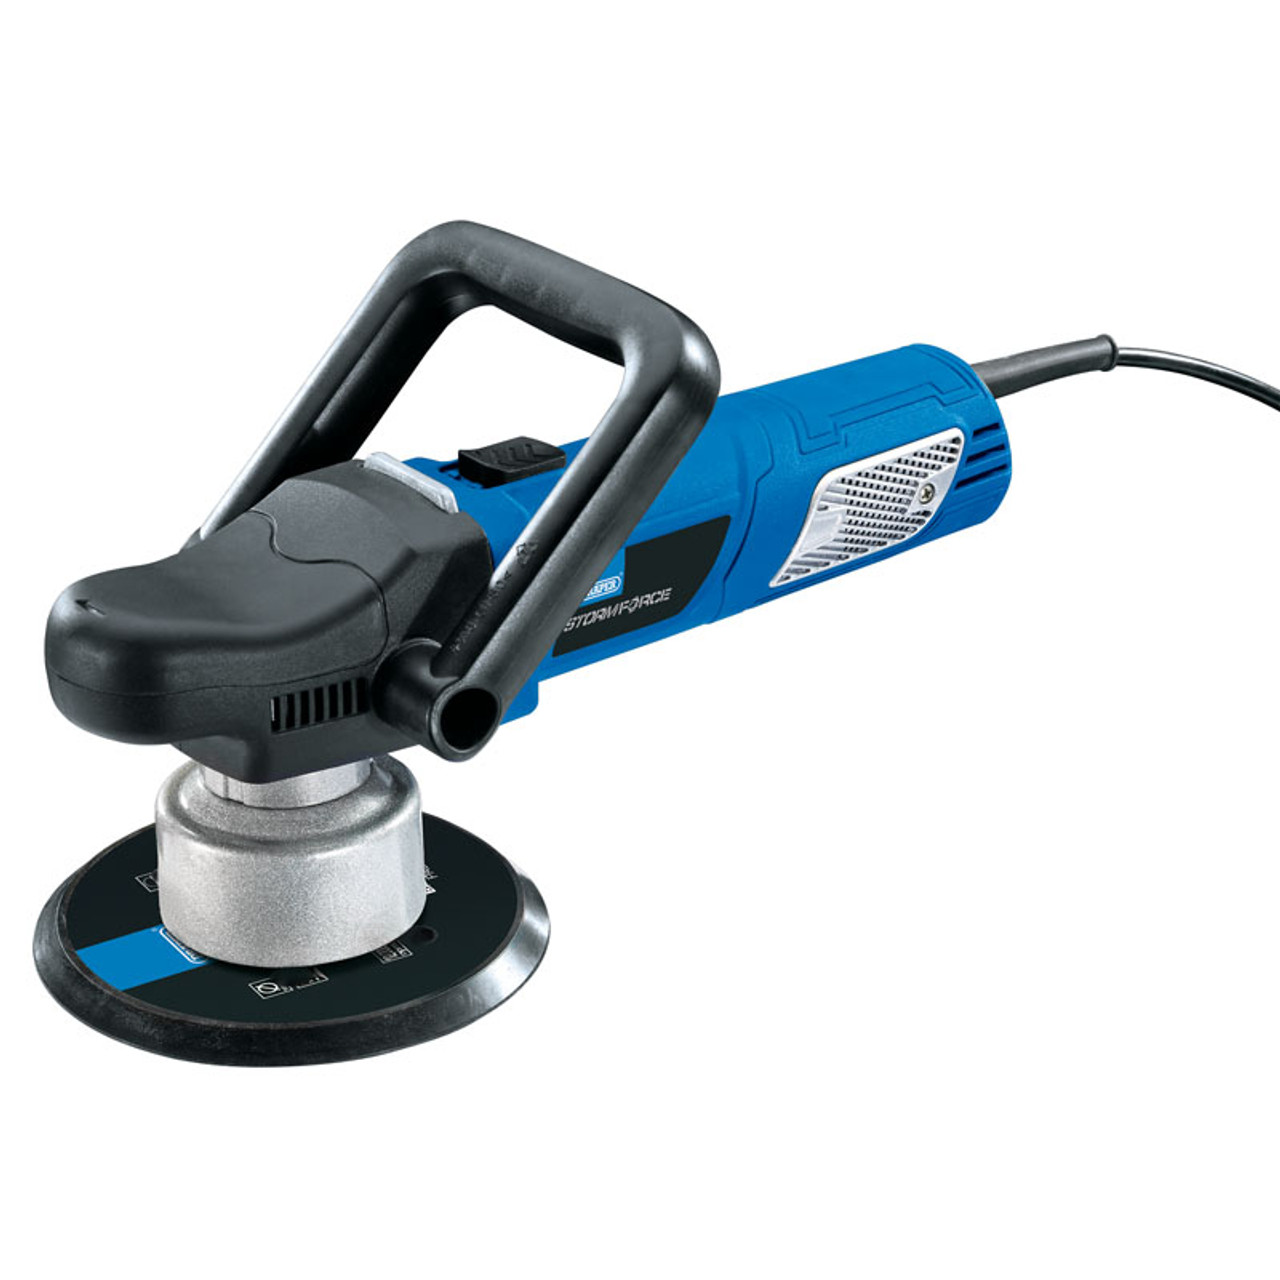 Draper Storm Force inch 150mm Dual Action Polisher (240V) 01817  ToolForce